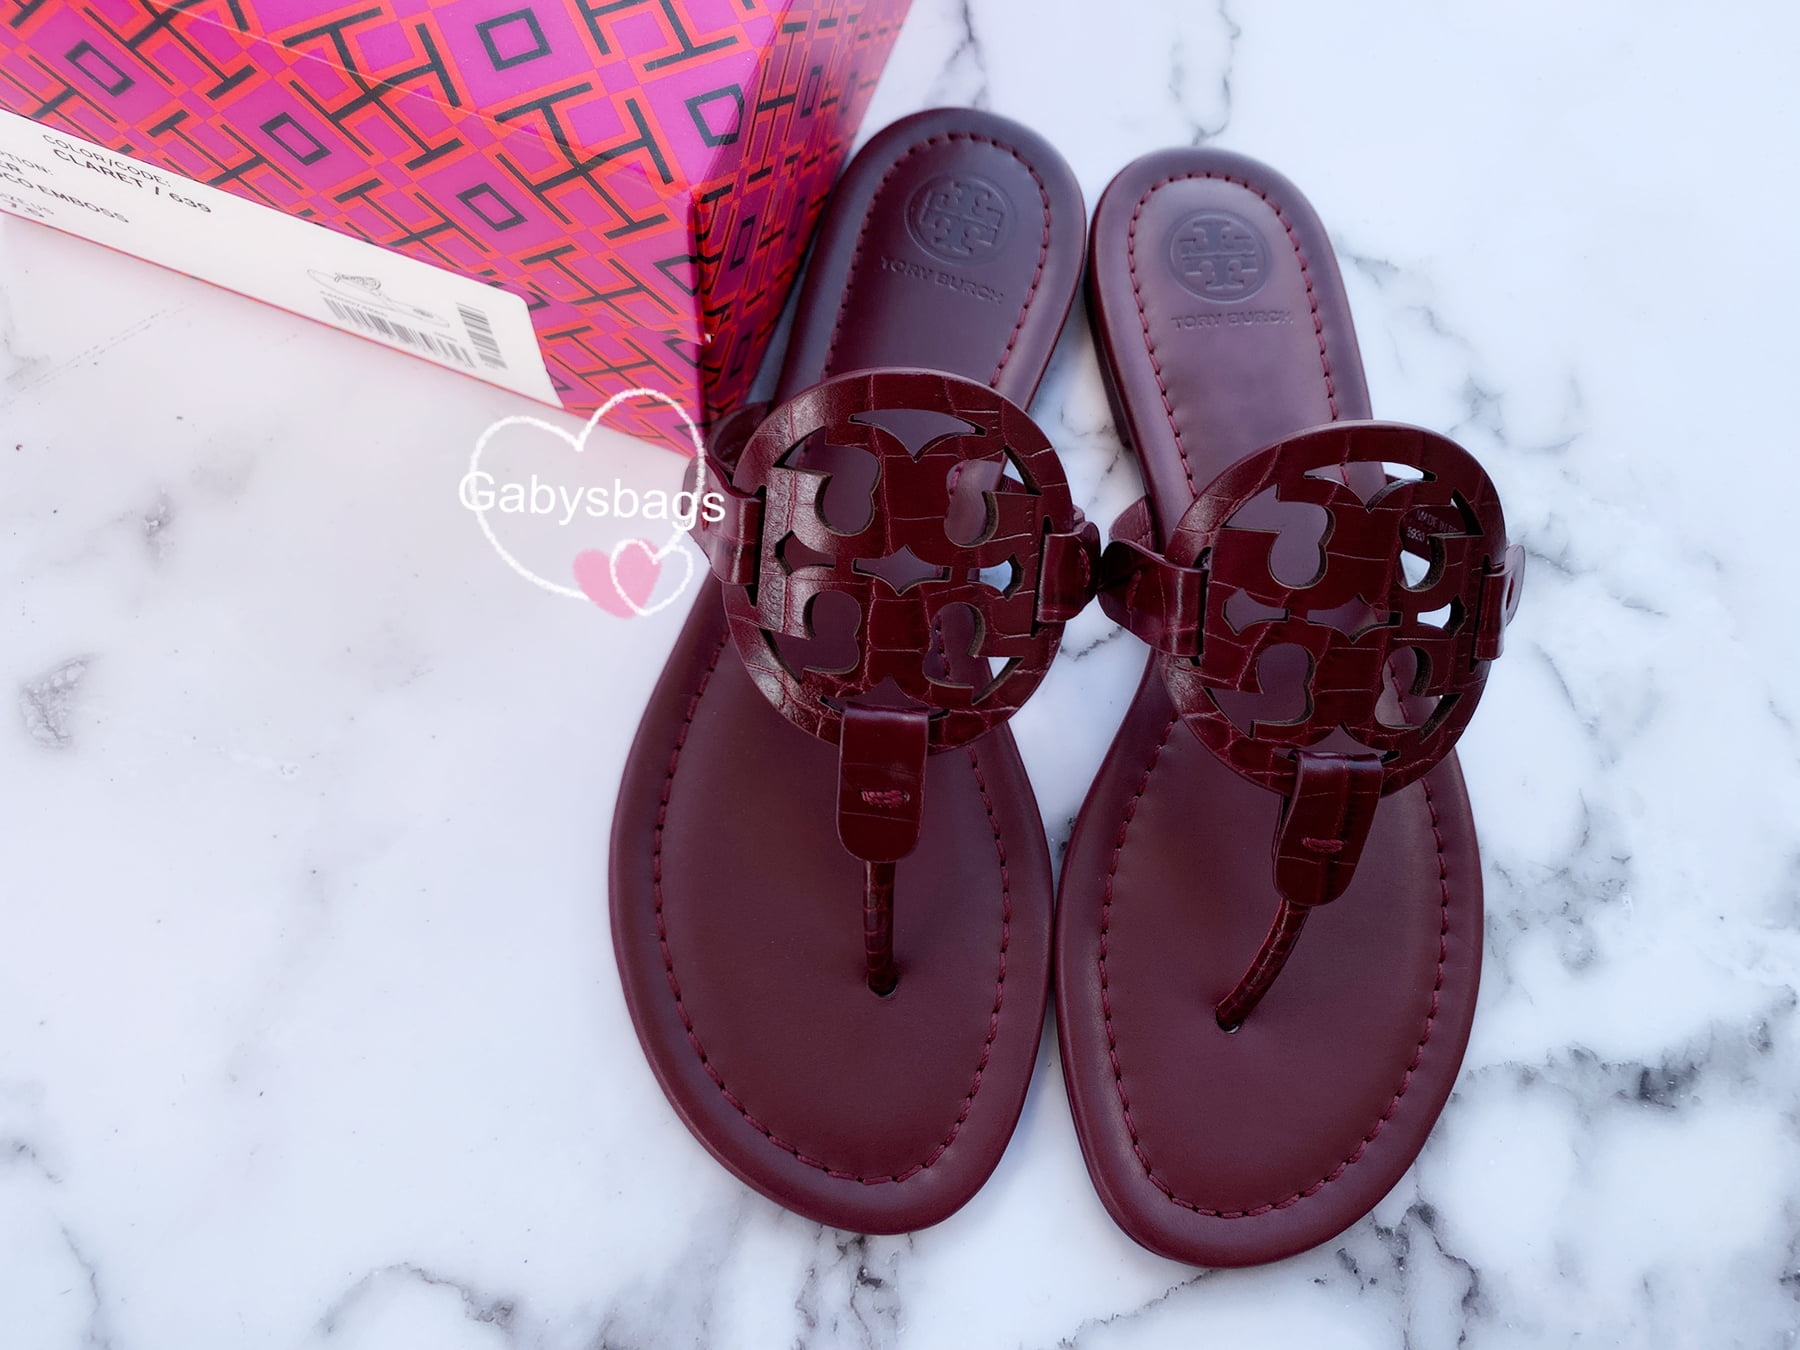 Tory Burch Miller Sandals Embossed Leather Claret Burgundy  